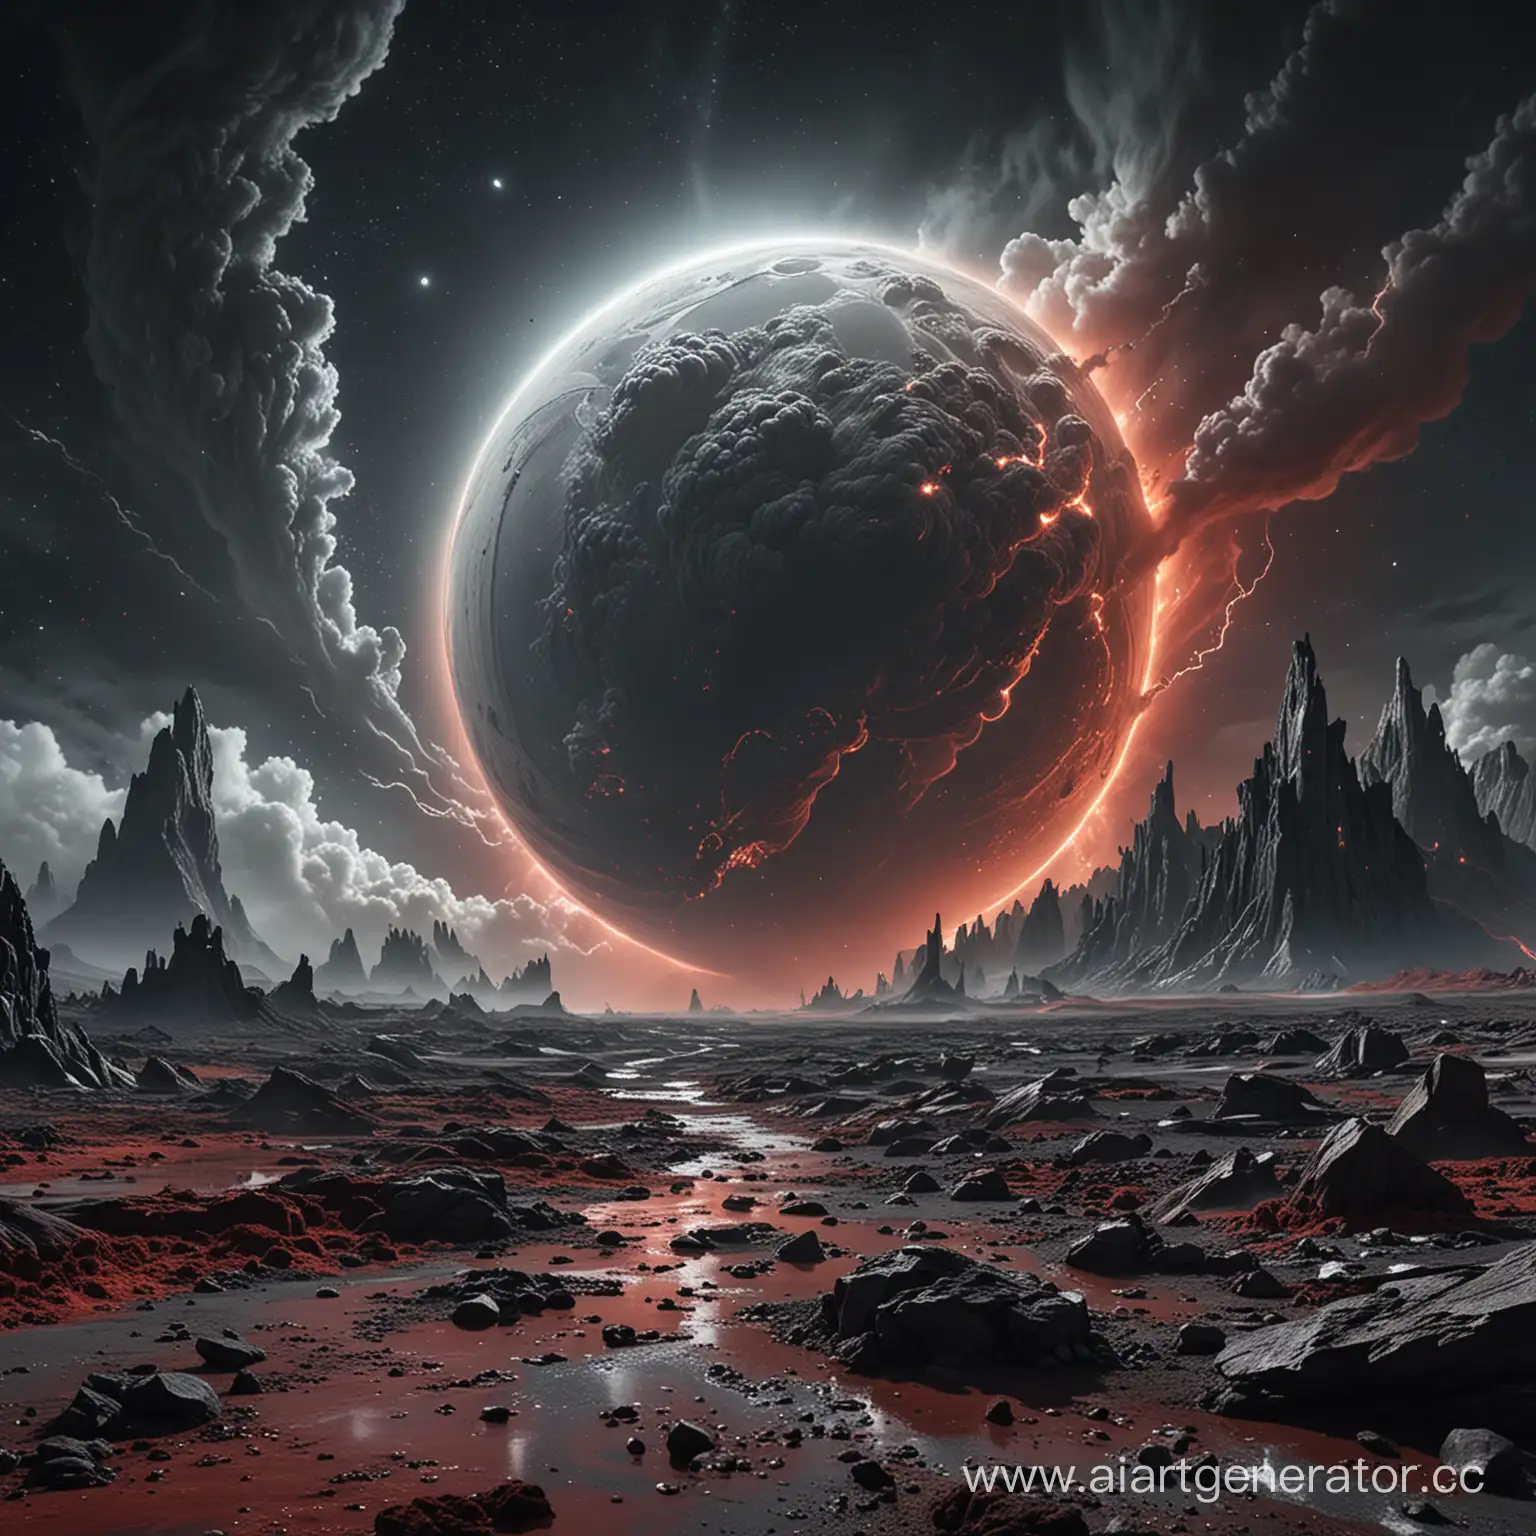 A hyper-realistic sci-fi lunar landscape featuring a mesmerizing red to grey glow, showcasing intricate textures and details in 4K resolution. The wide shot captures a massive grey to white tornado stirring up dust particles on the moon's surface, evoking a cinematic and epic vibe reminiscent of "The Dark Crystal." Shot in street style with analog undertones, this image radiates ultra-realism, captured on a Fujifilm XT3 with a Plaubel Makina W67 Camera, 50mm lens, and F/2.8 aperture. HDR, color grading, volumetric lighting, reflections, and a shallow depth of field combine to create a visually stunning and extraordinarily detailed scene, akin to a high-fashion photograph. cinematic, epic realism,8K, highly detailed, documentary film still, analog style, RAW photo, hyper real photo, ultrarealistic uhd faces, 8k uhd, dslr, soft lighting, high quality, film grain, Fujifilm XT3, photographed on a Plaubel Makina W67 Camera, 50mm lens, F/2. 8, HDR, hyper-realistic, colorgraded, volumetric lighting, shallow depth of field, reflections, absurdres, fashion shot